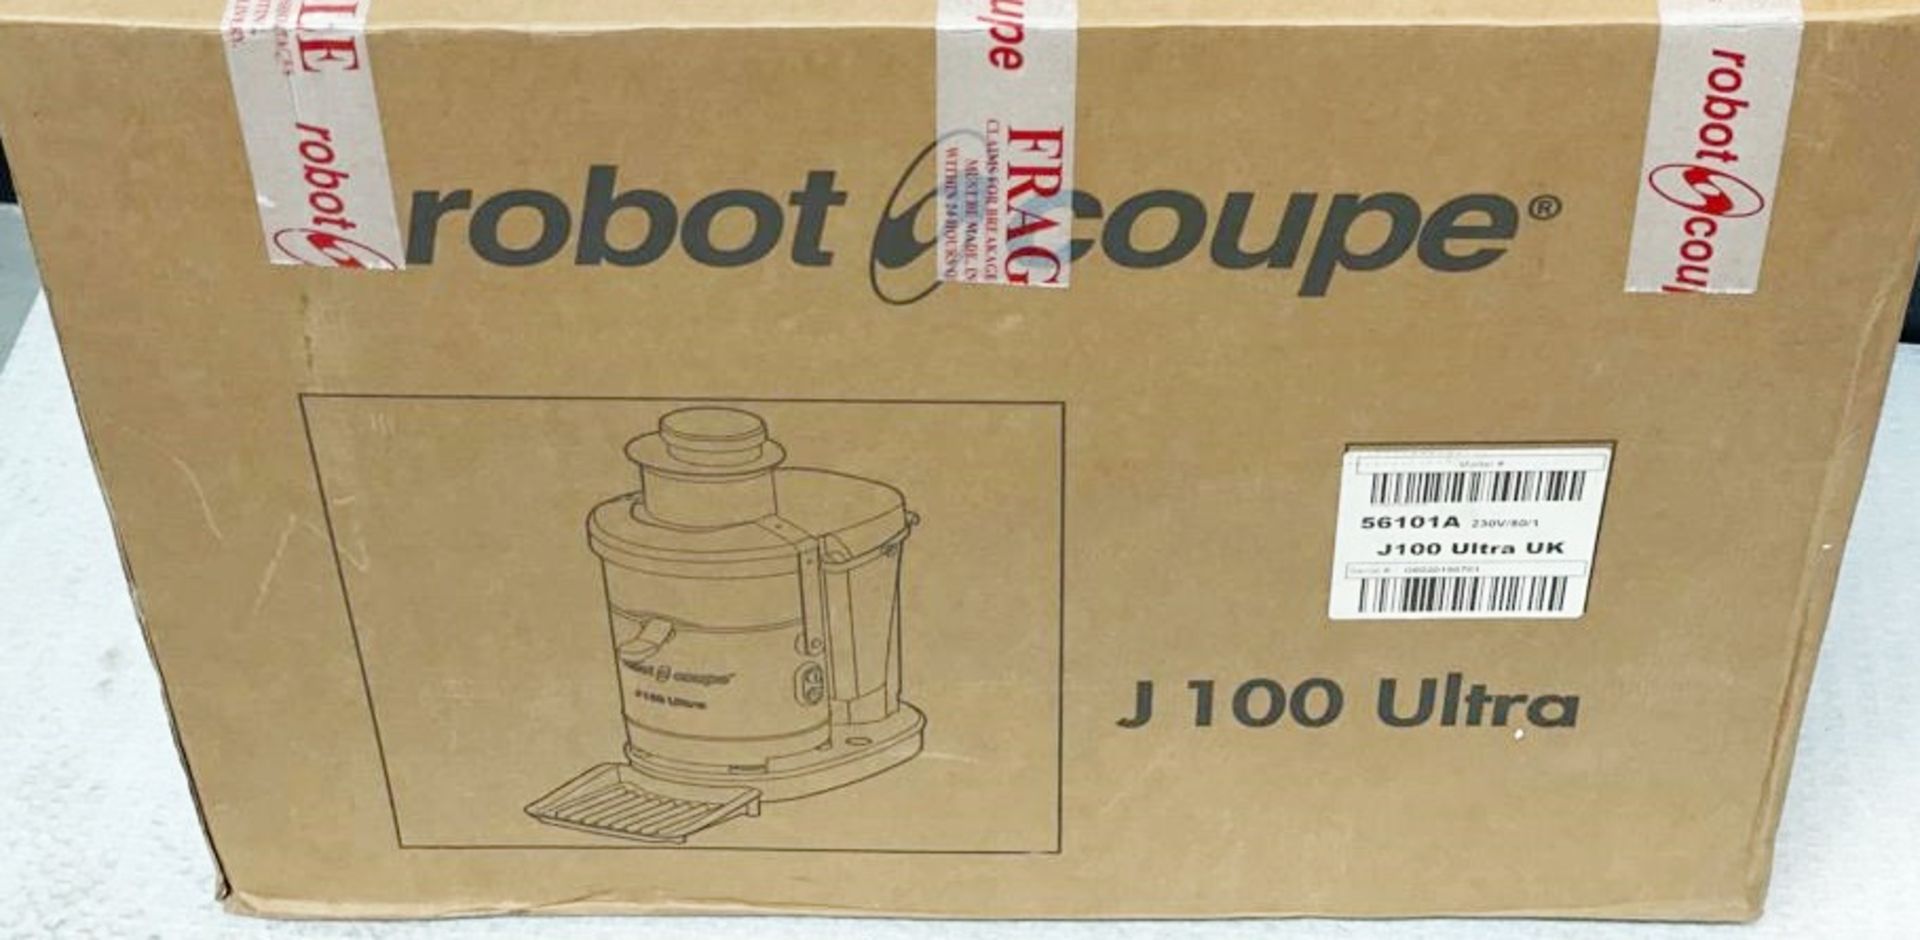 1 x Robot Coupe J100 Juice Extractor Brand New RRP £1500.00 - Ref: AUR 109- CL652 - Location: - Image 3 of 7